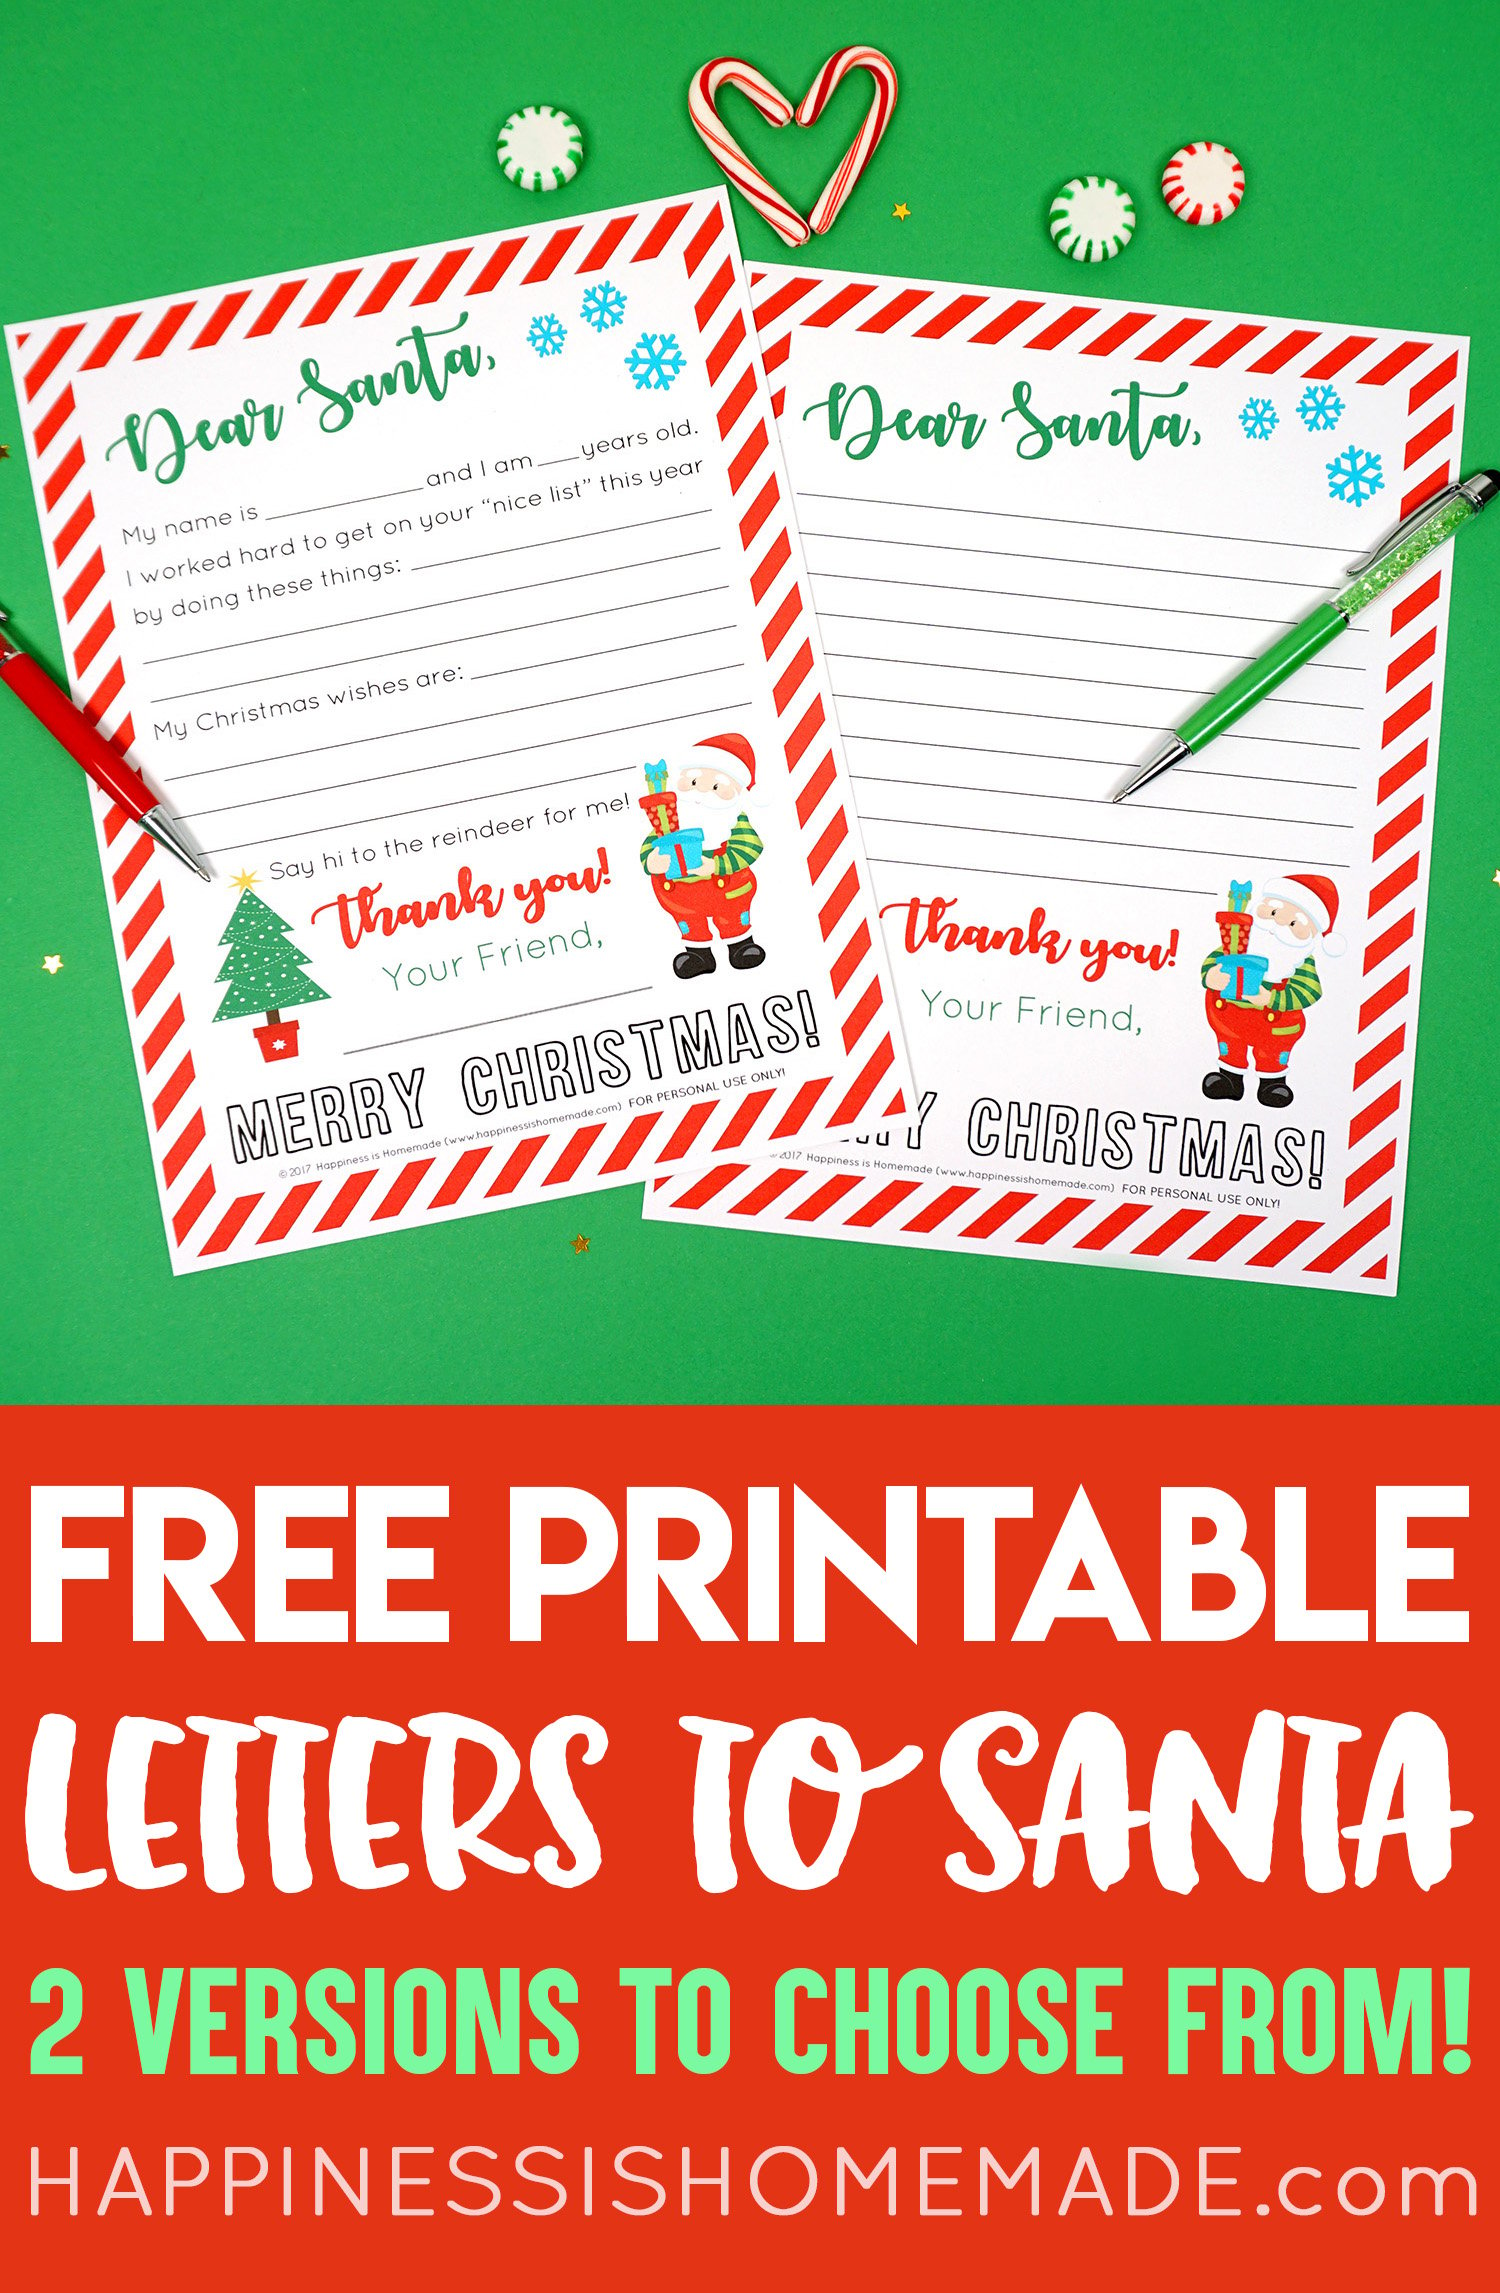 2 Letter to Santa Printables Slightly Overlapping With Large Text Stating \"Free Printable Letters to Santa\"